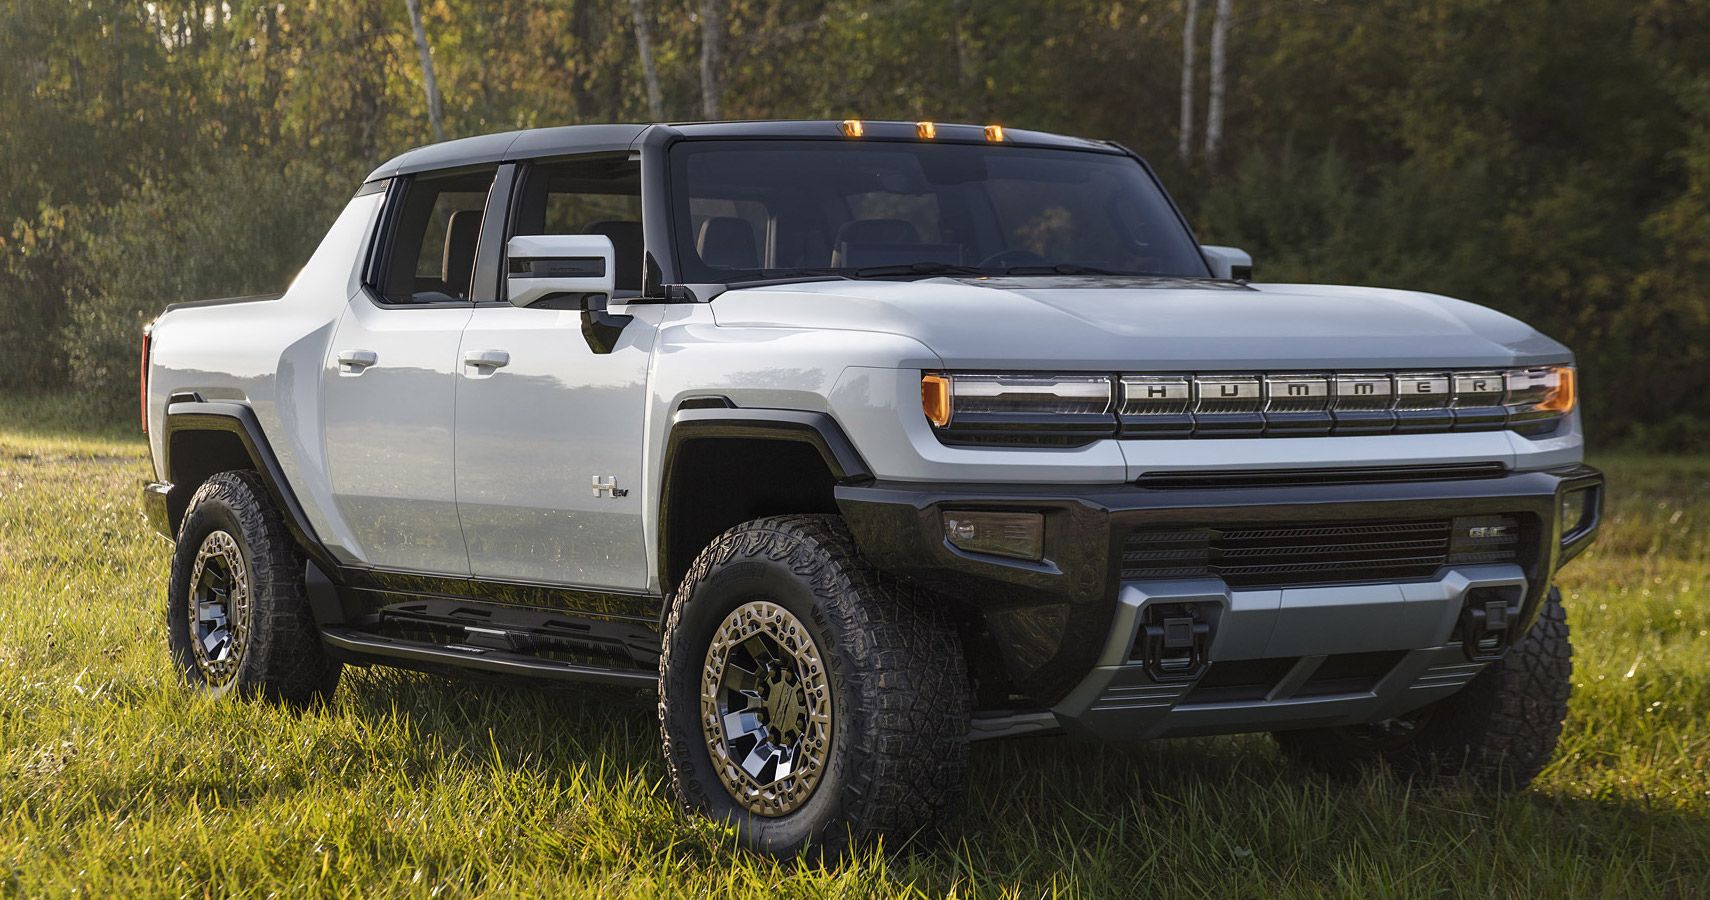 4 Pickup Trucks And 4 SUVs That Can Beat The Challenger Hellcat To 60 MPH